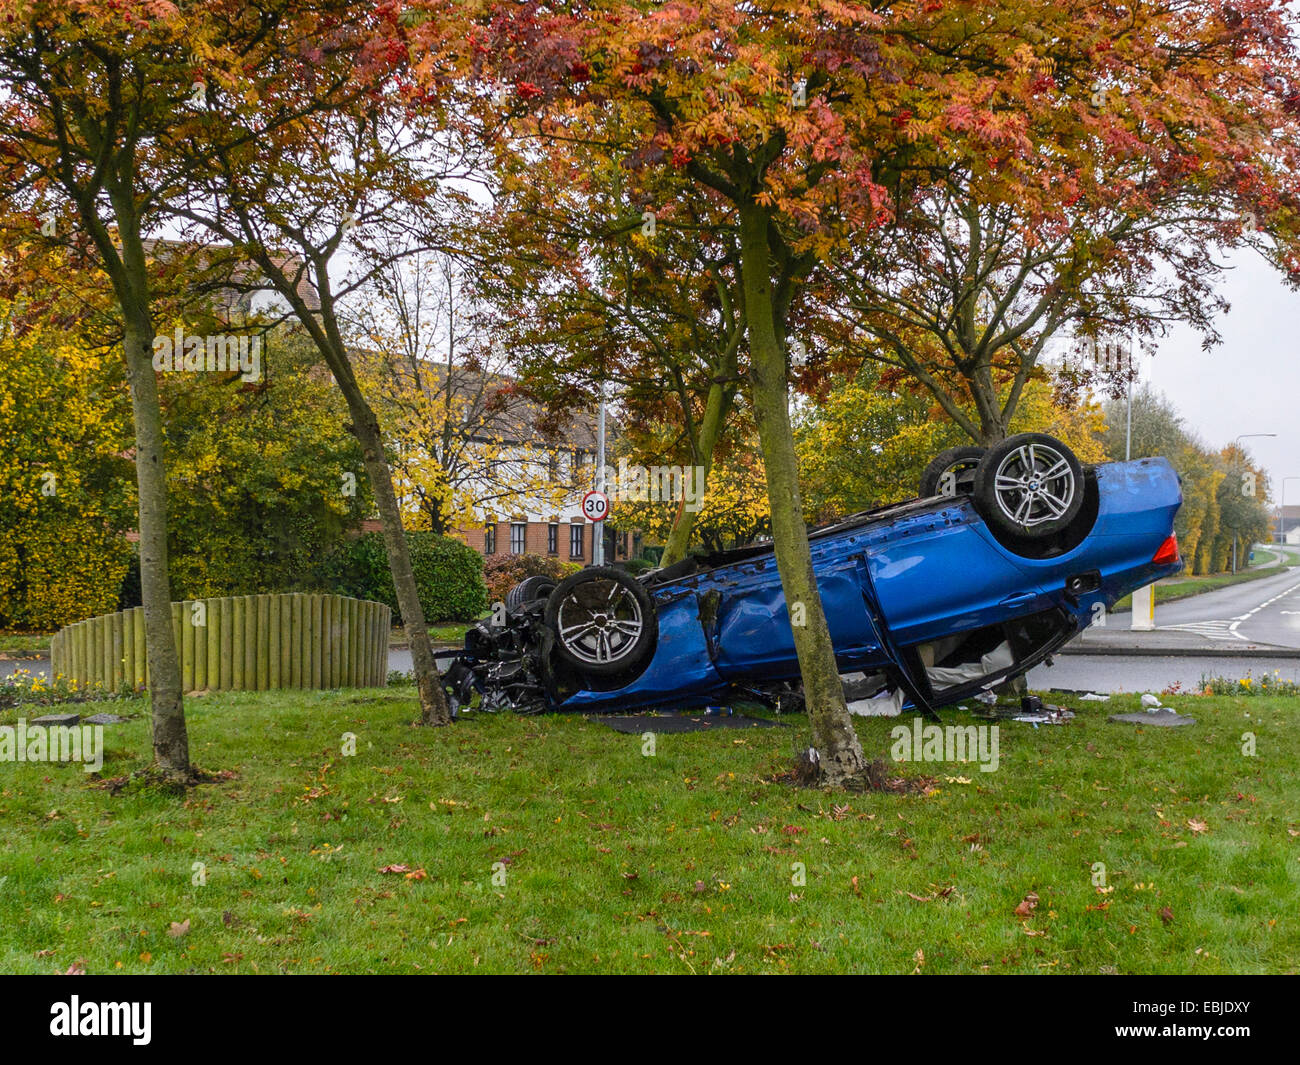 Unusual Motor vehicle accident, depicting blue sports saloon vehicle on its roof, amongst trees on a roundabout traffic island Stock Photo